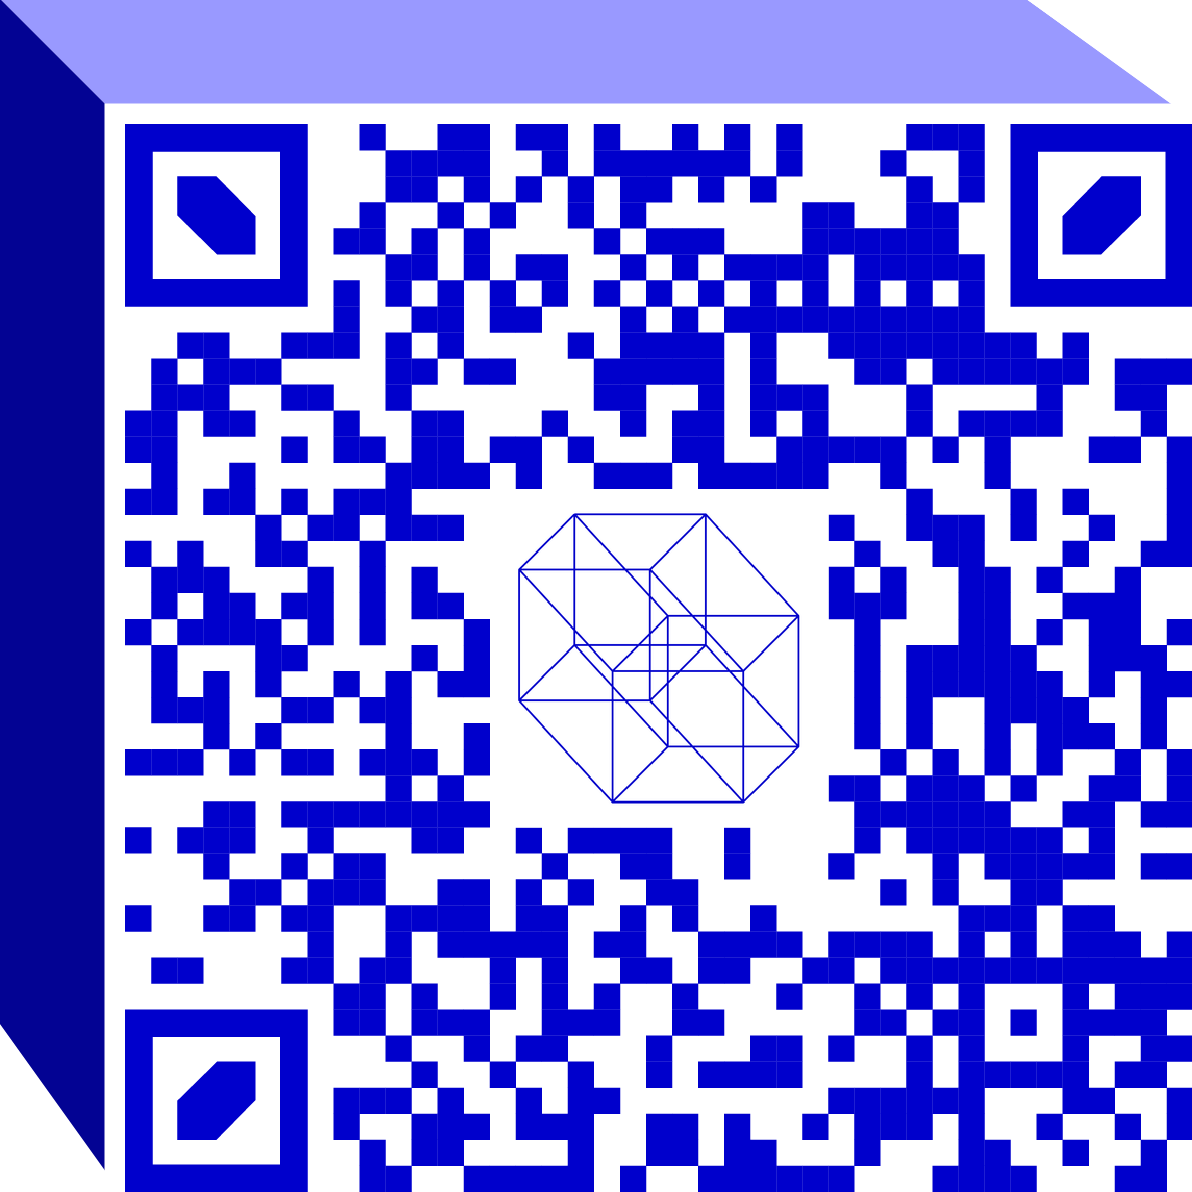 QR code for augmented reality artwork